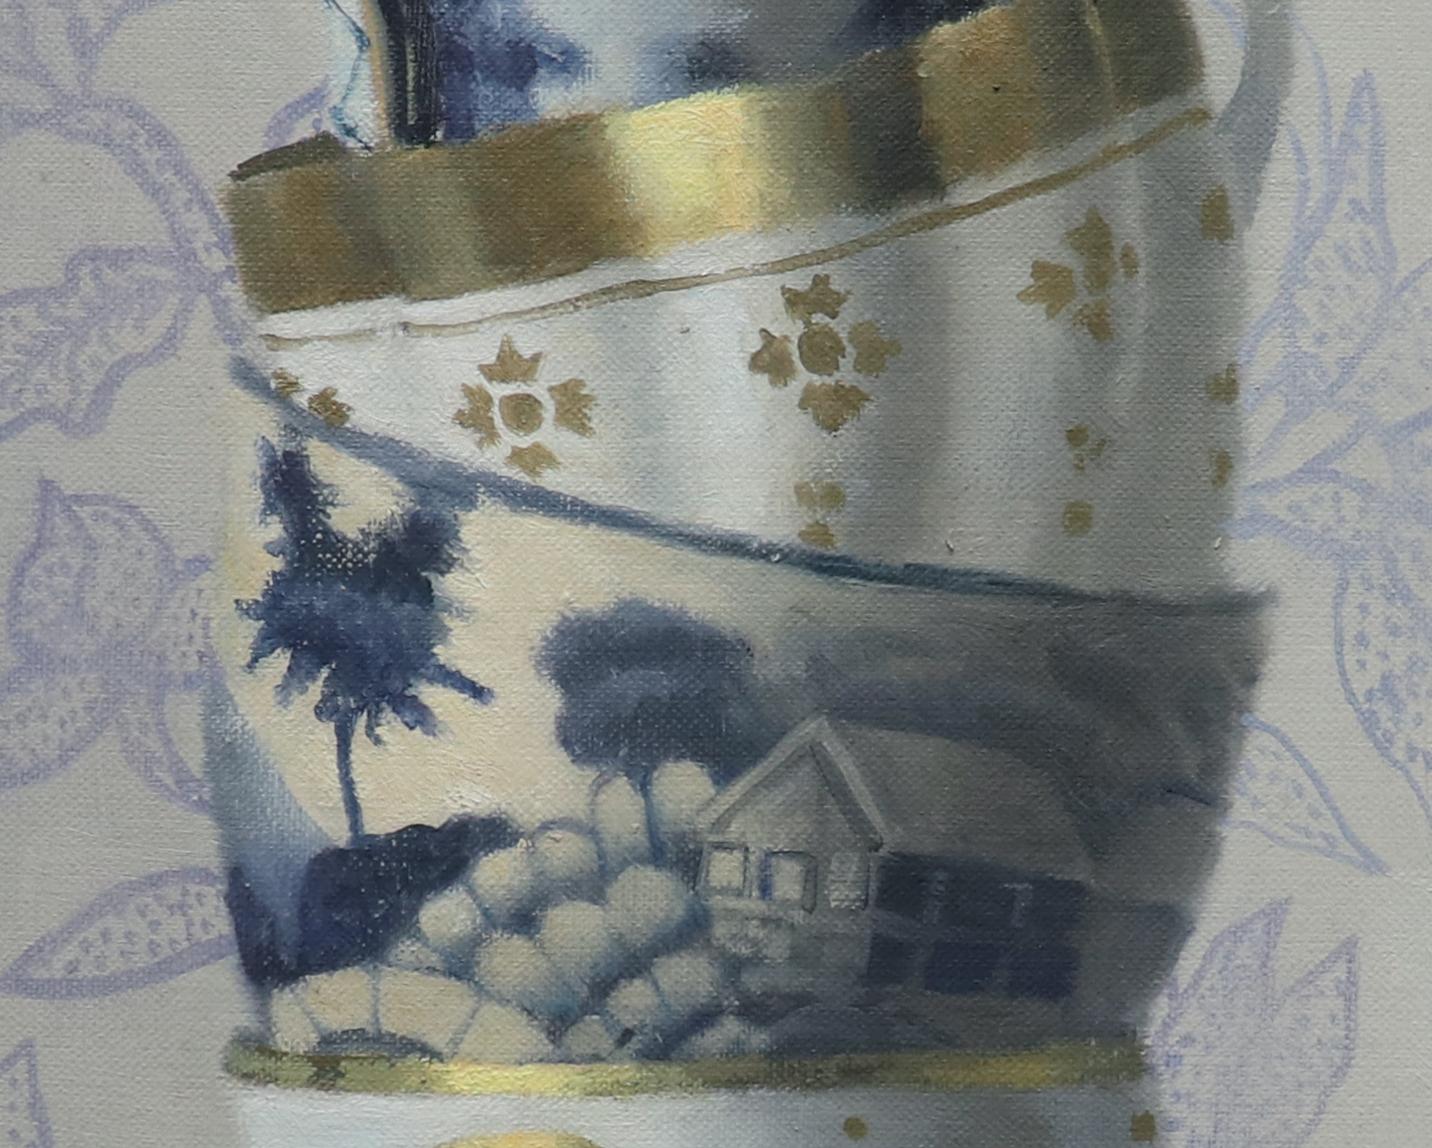 Stacked Cups on Blue, Contemporary Still Life, Antique, Porcelain, Oil  - Realist Painting by Olga Antonova